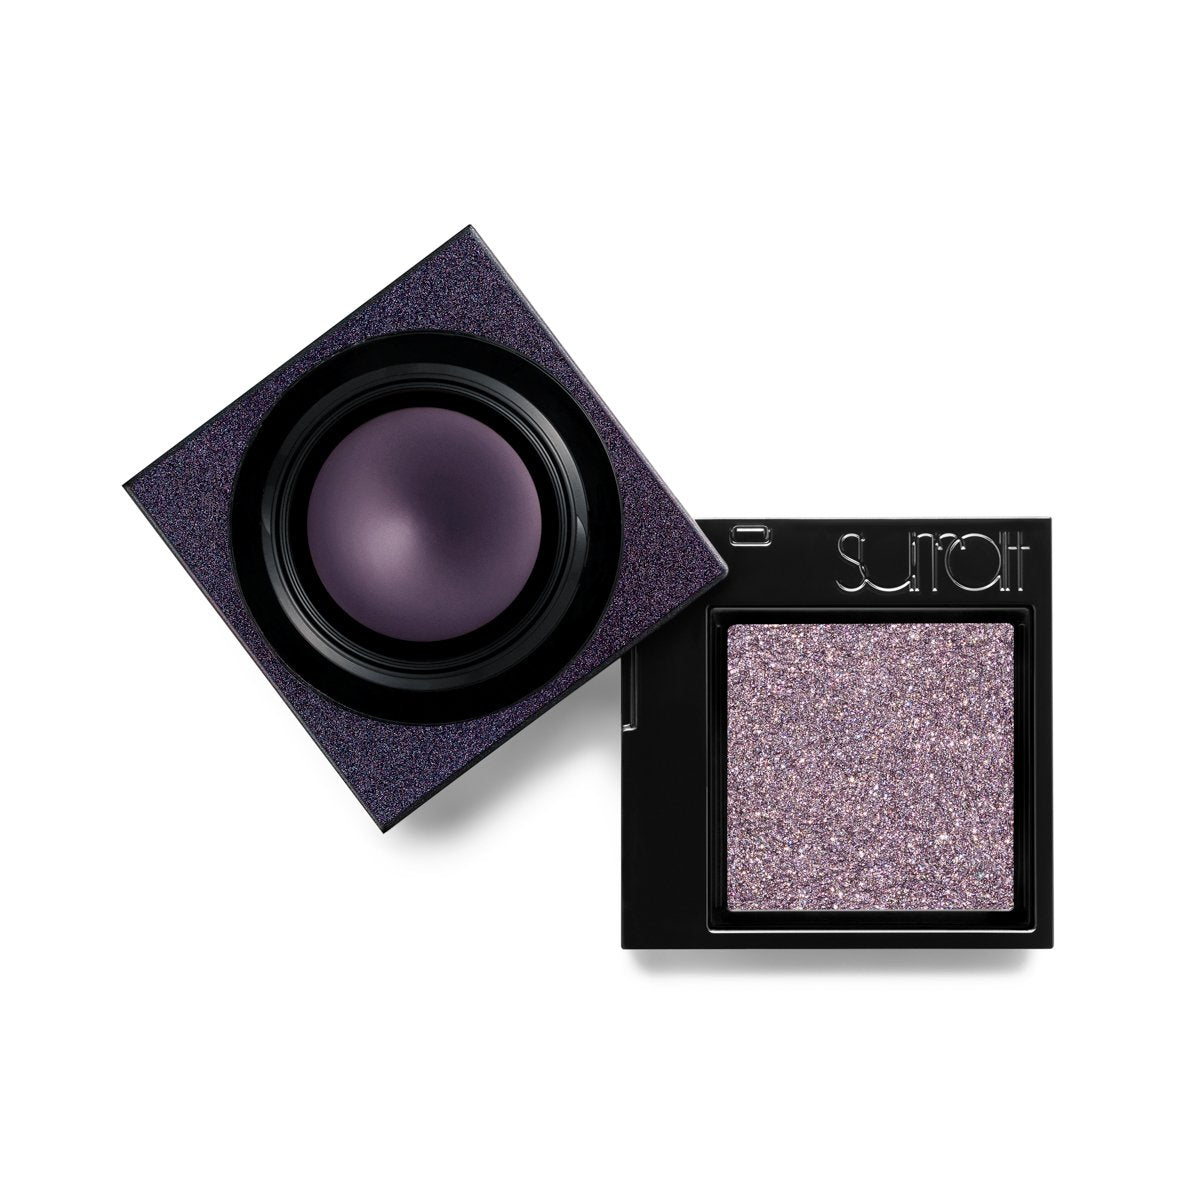 GLAMOUR EYES - ROYAL PLUM CREAM WITH BRILLIANT BLUE-VIOLET SHADOW - Water-resistant, matte cream shadow in royal plum with blue-violet duochrome powder